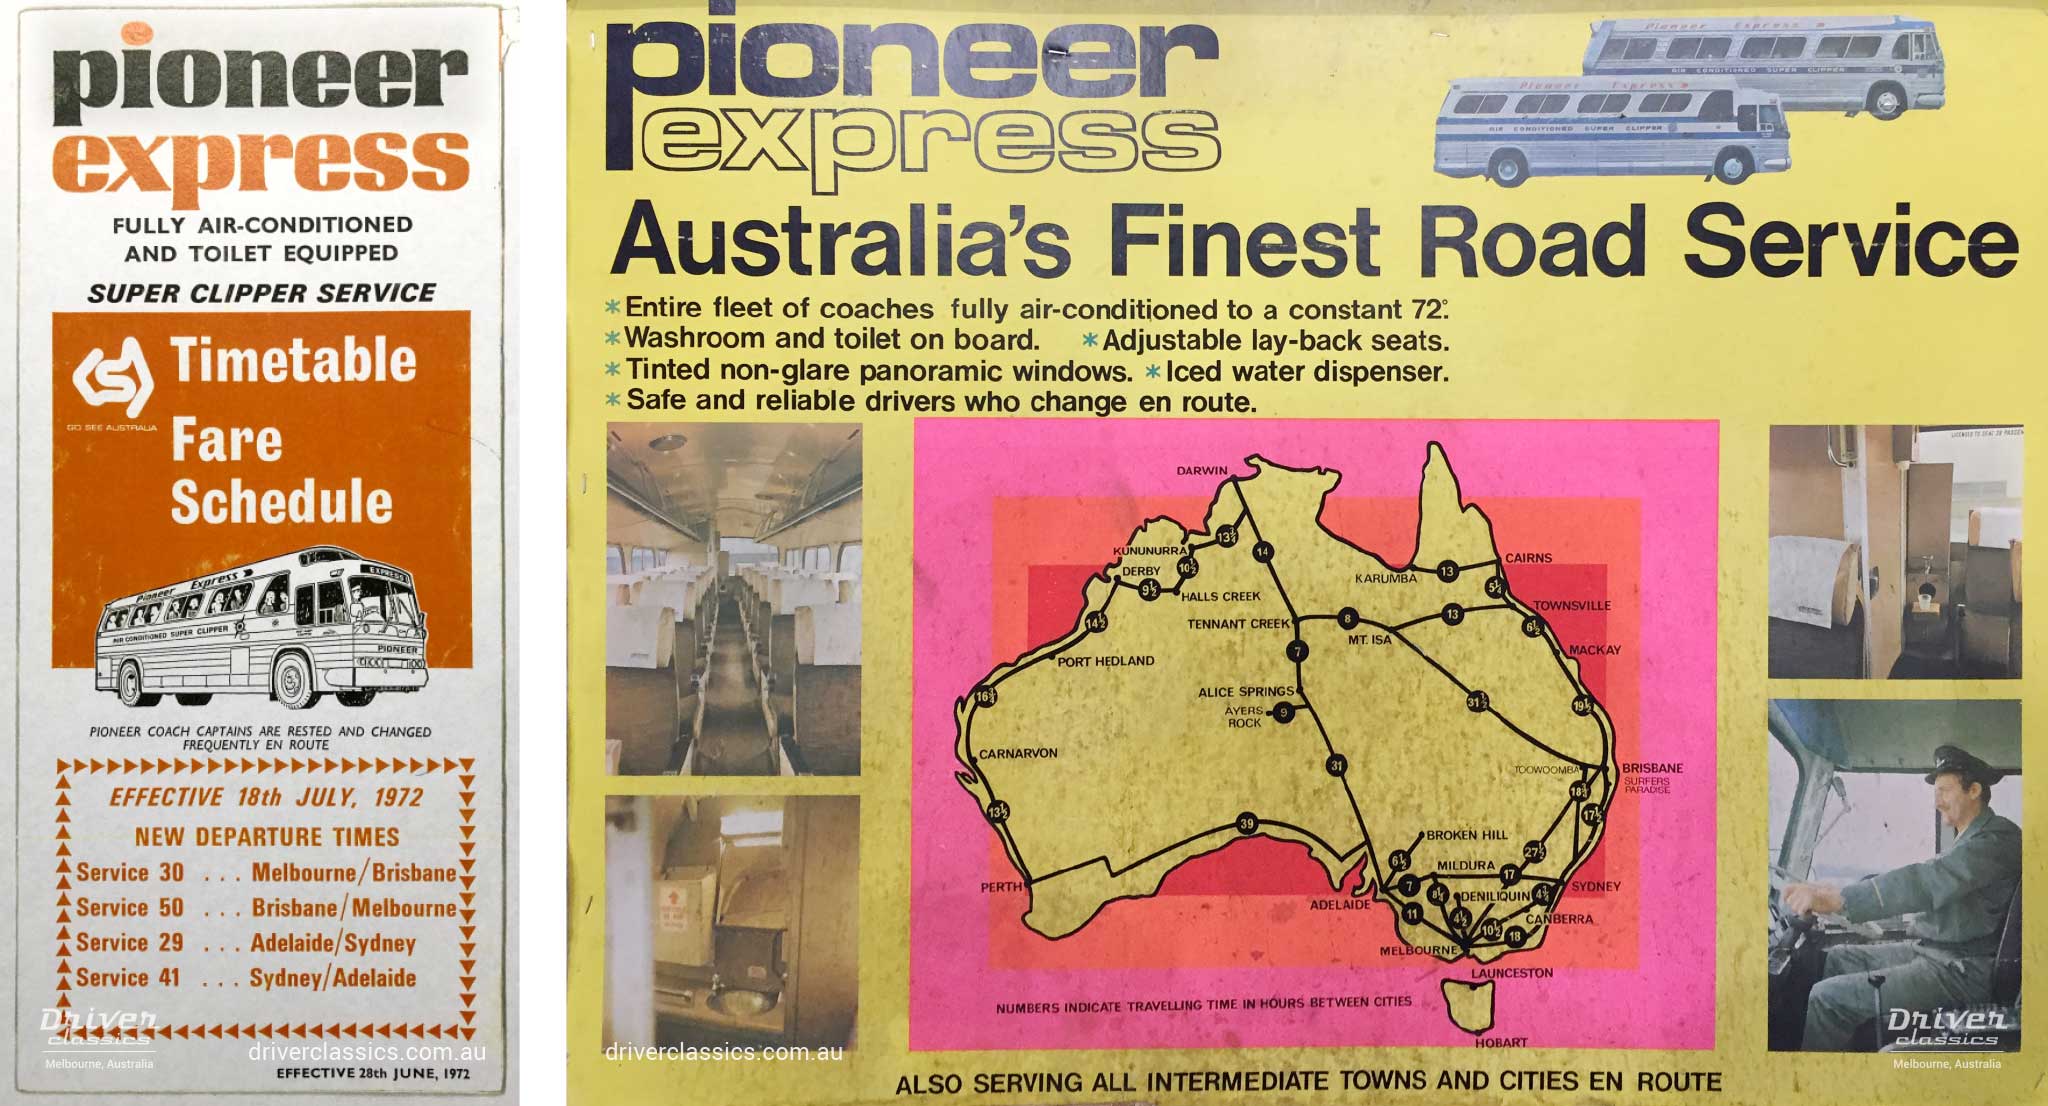 Pioneer Express timetable from 1972 featuring GM PD 4107 bus. Pioneer Express promotional material, circa late 1960s featuring GM PD 4106 and GM PD 4107 buses.